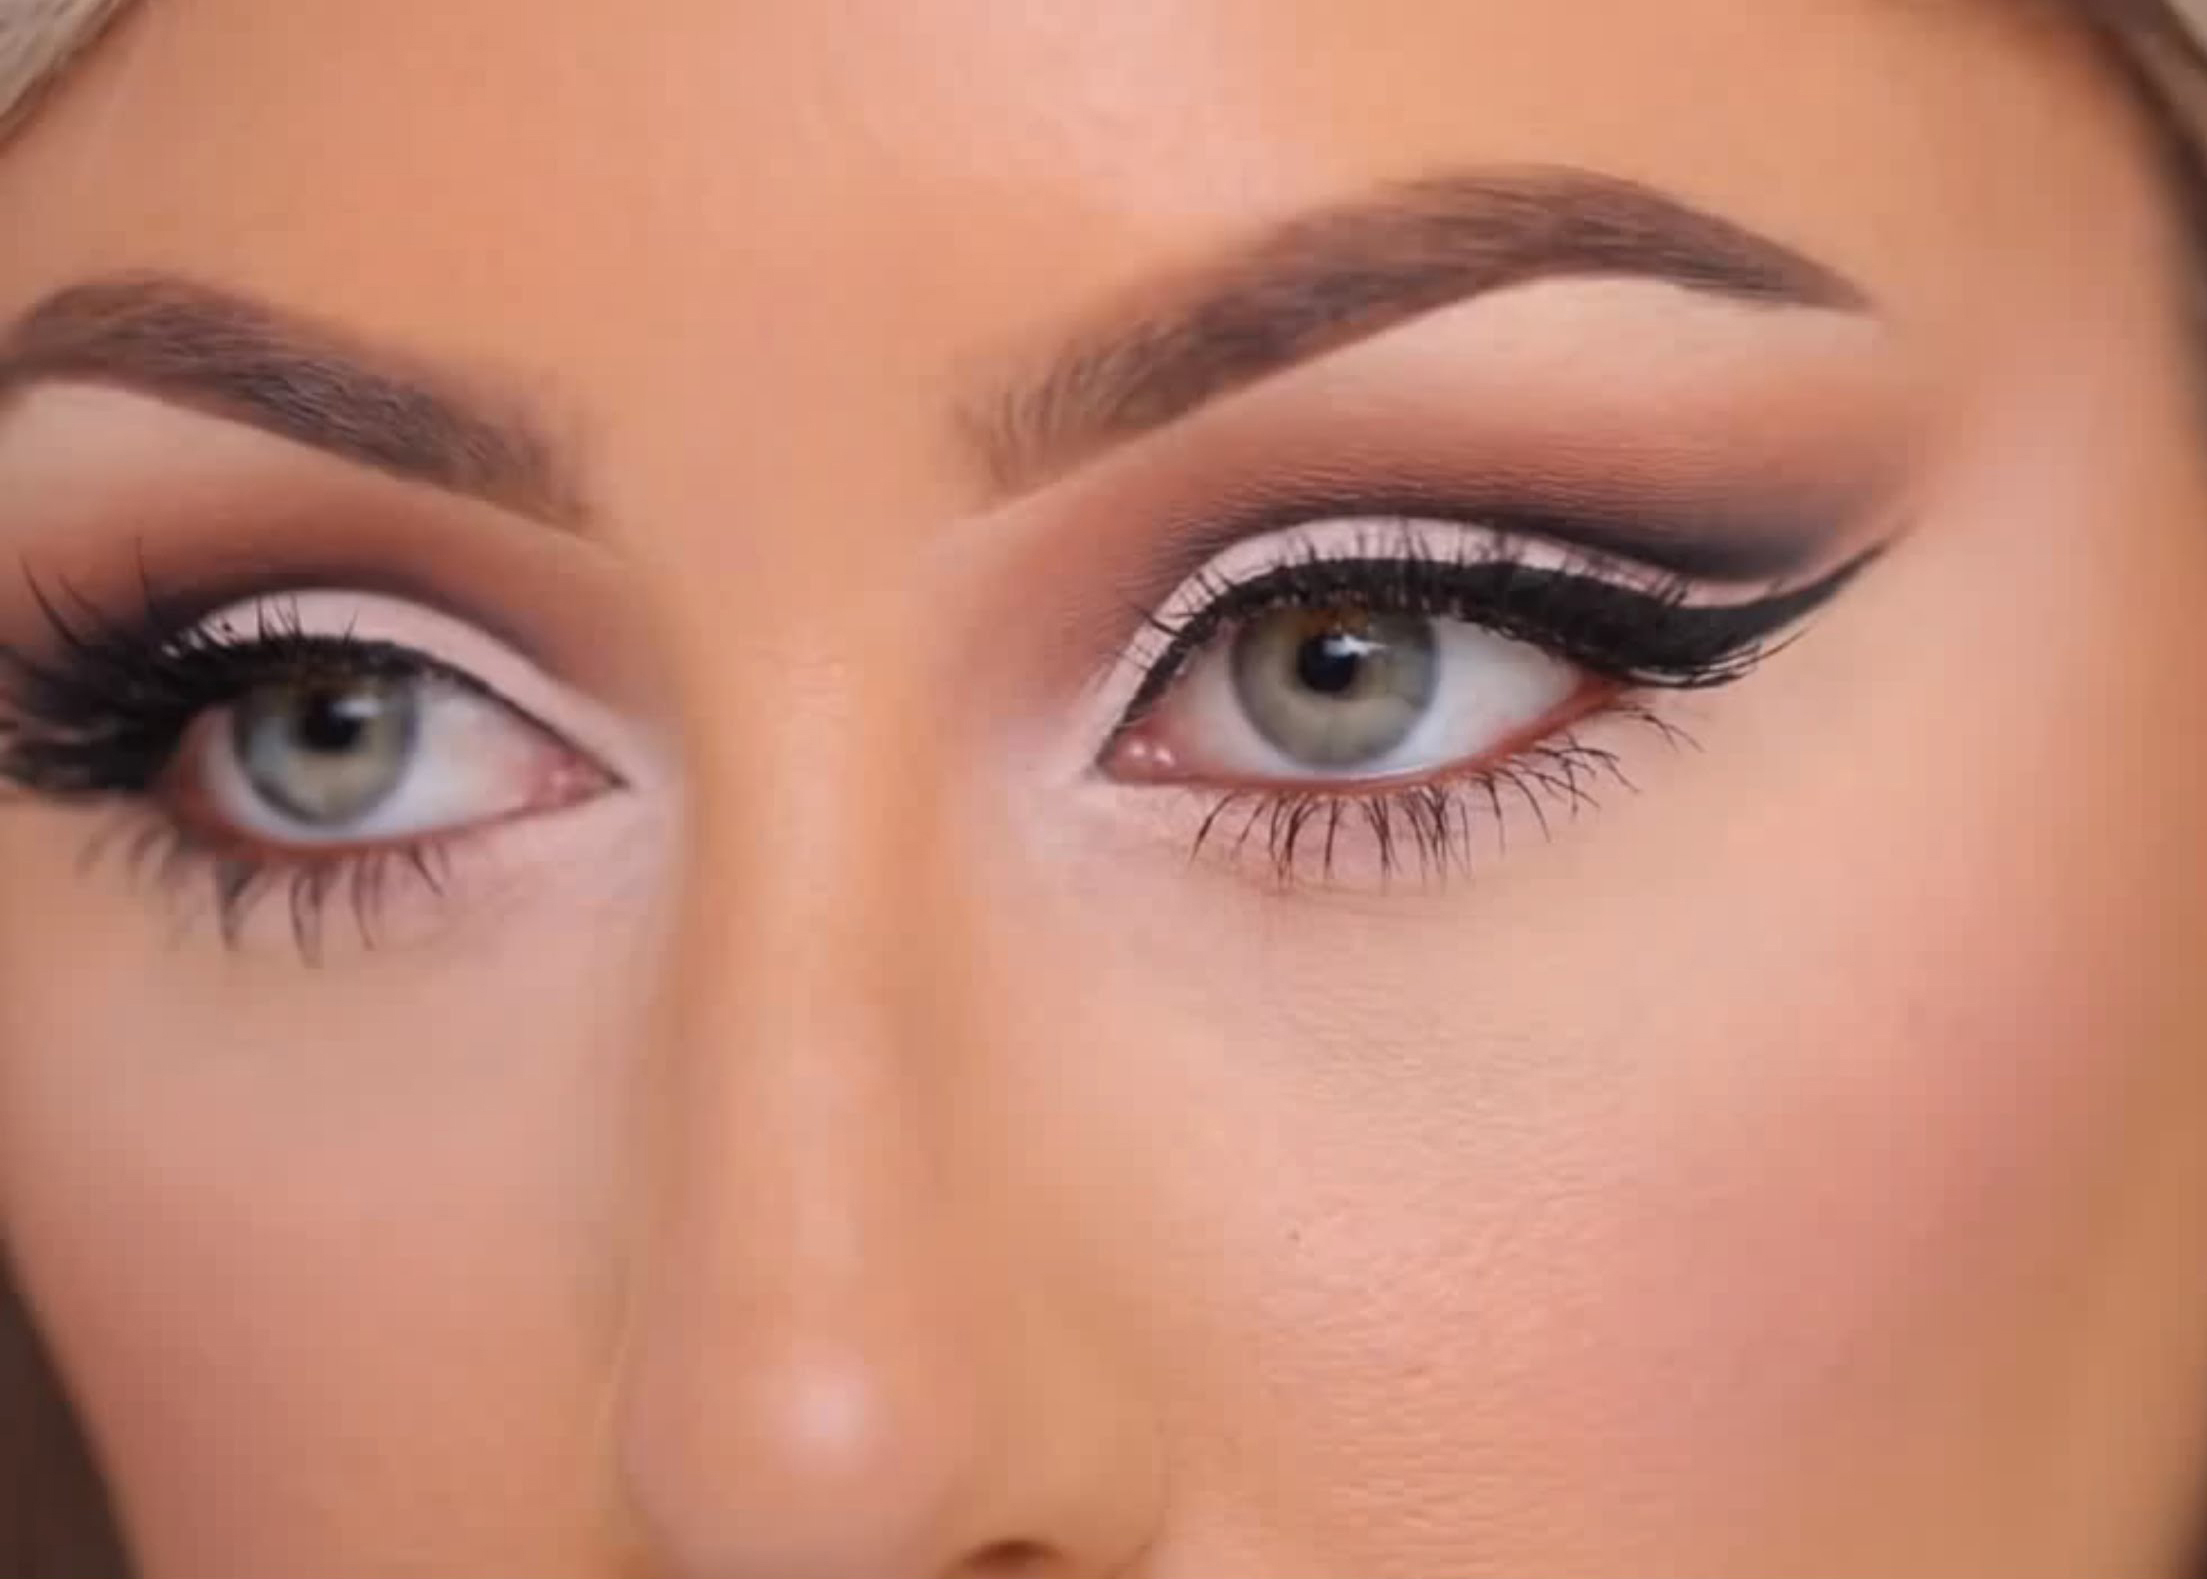 Eye Makeup To Make Eyes Look Bigger How To Create A Cut Crease With Eyeshadow So Your Eyes Look Bigger